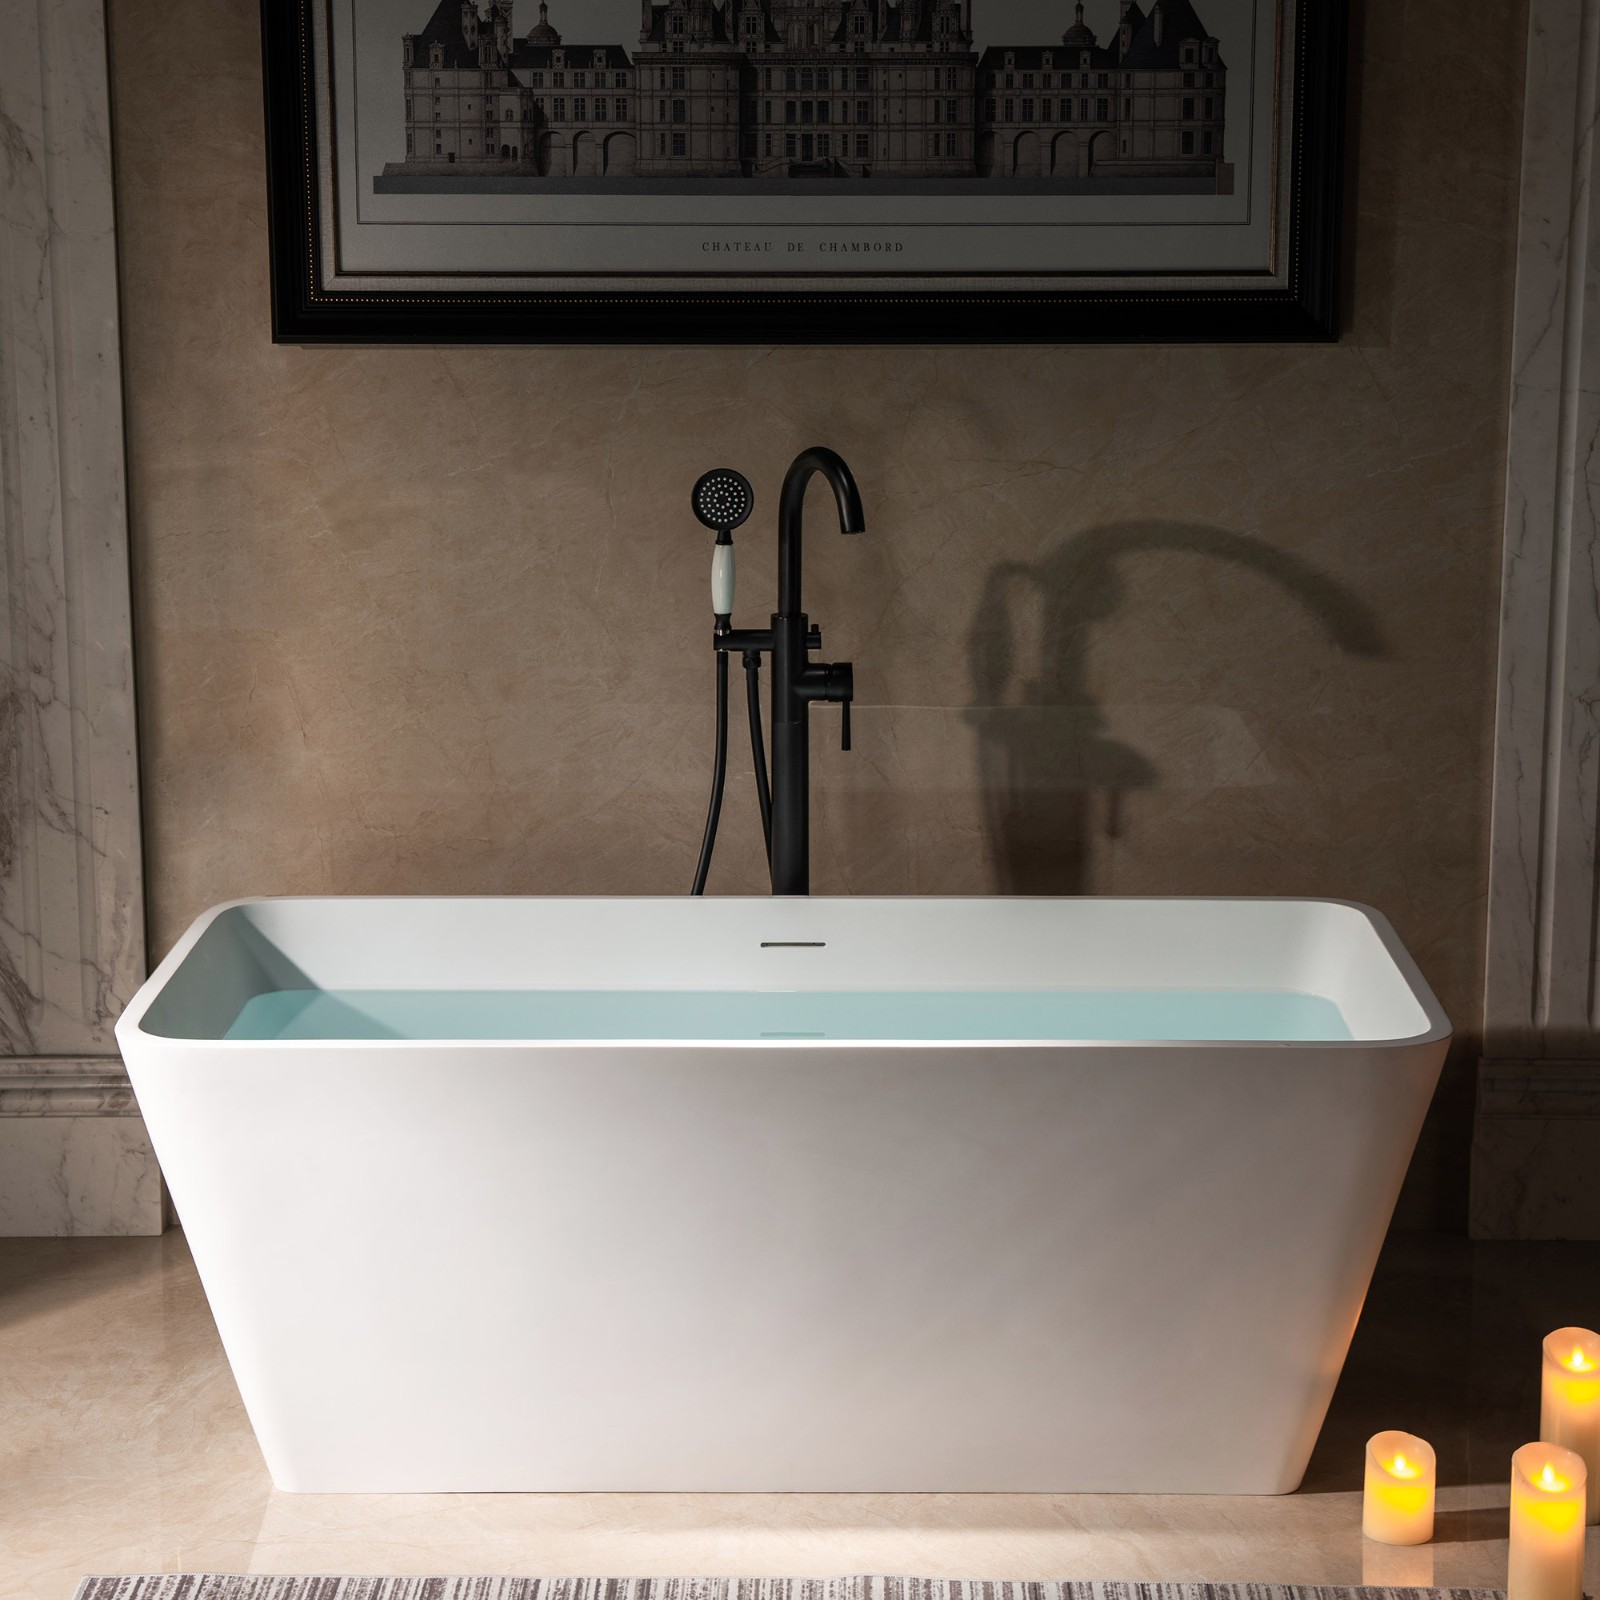  WOODBRIDGE 59 in. x 27.5 in. Luxury Contemporary Solid Surface Freestanding Bathtub in Matte White_16